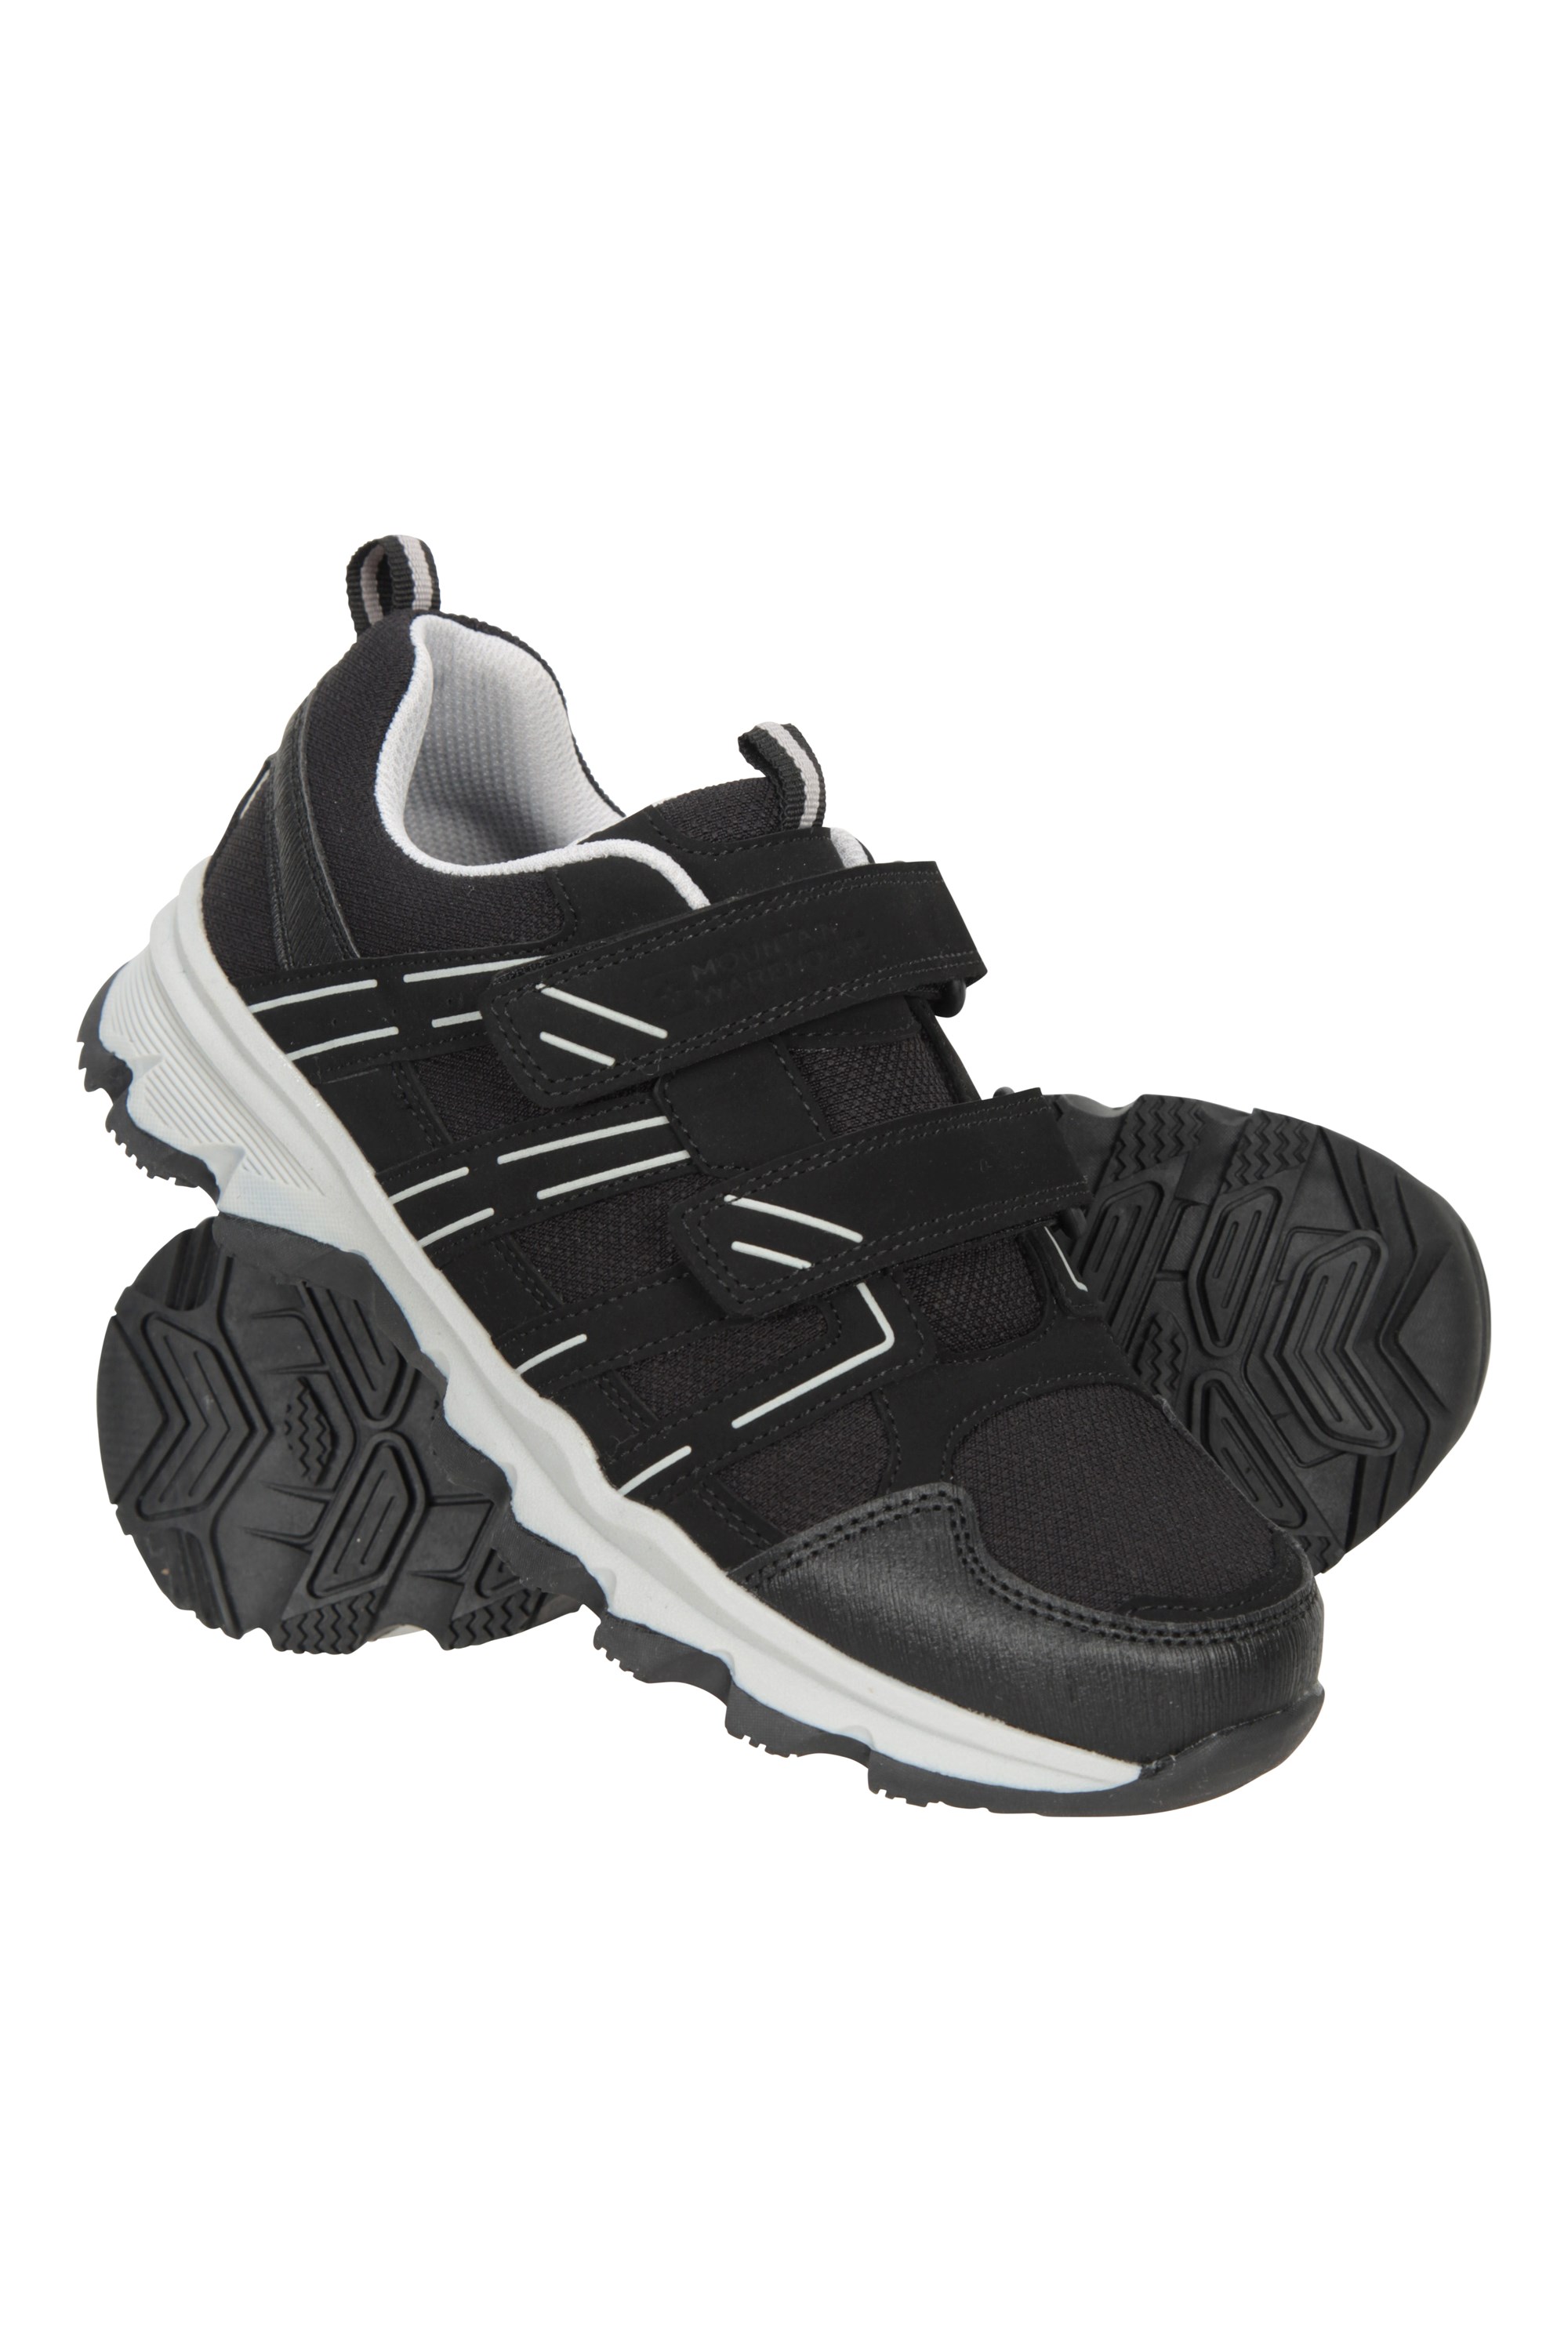 Mountain Warehouse Mountain Warehouse Boys girls Black Mars Kids Hook and Loop Shoes Trainers US 2 